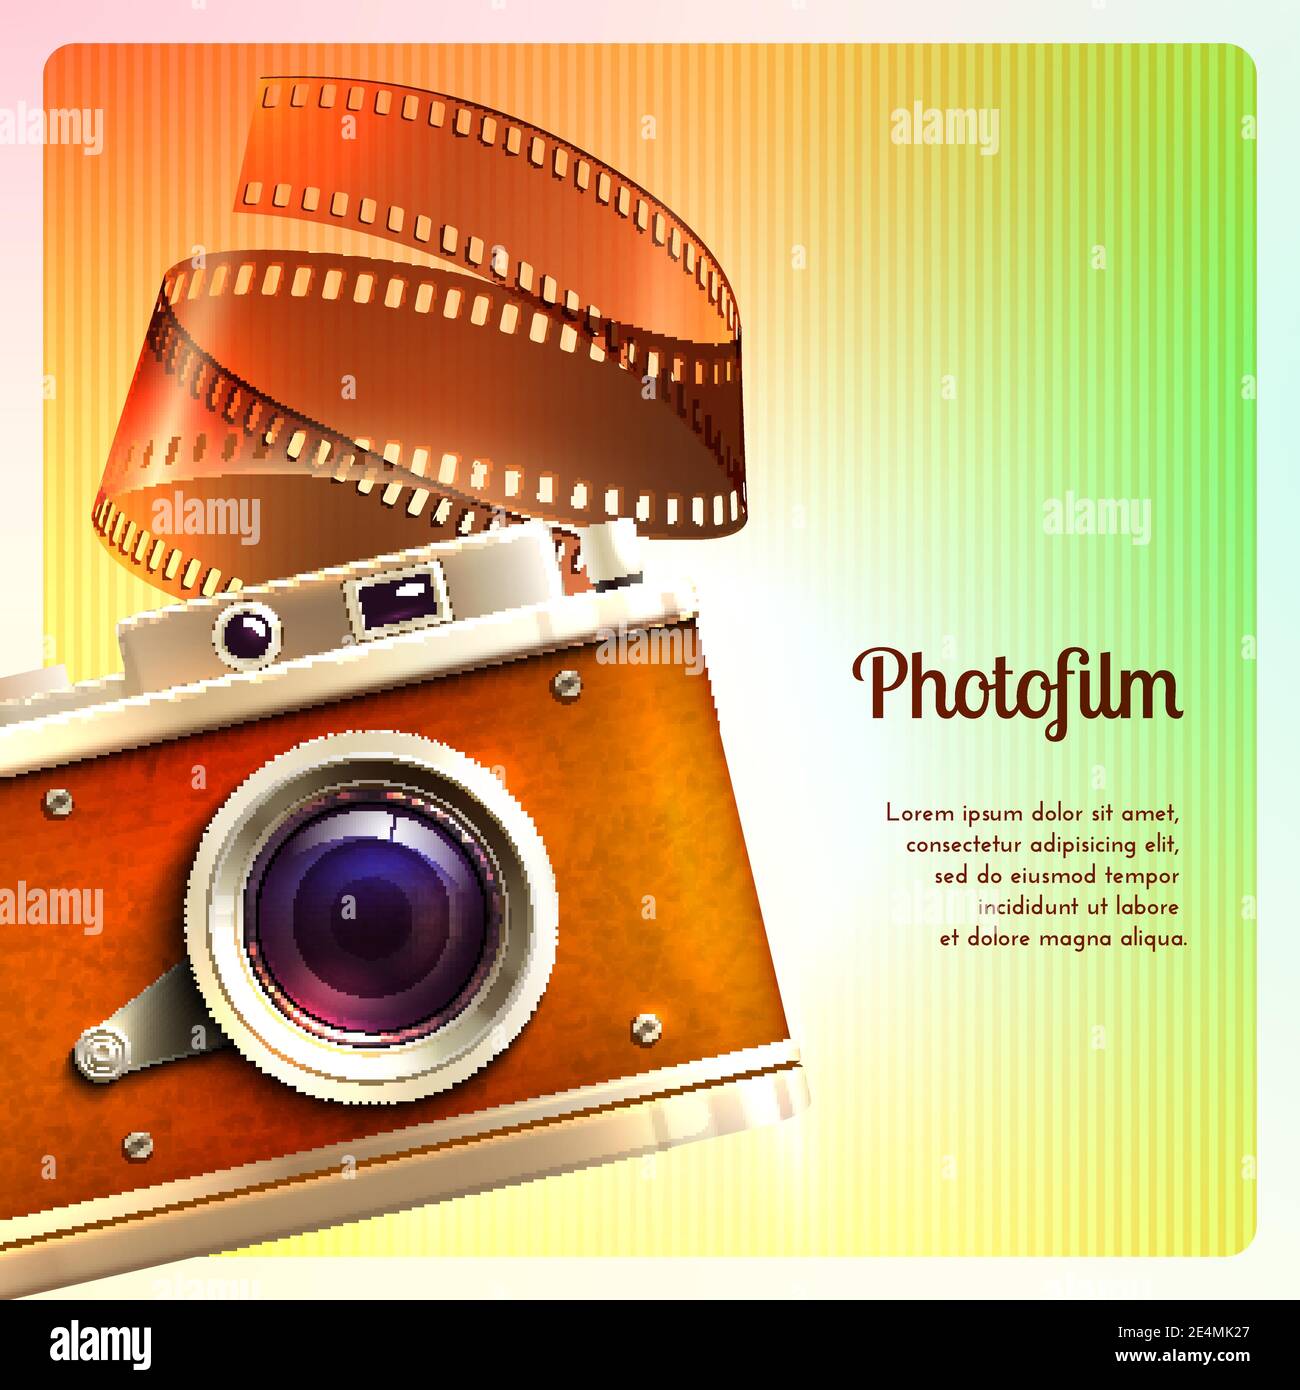 Retro camera vintage photographing technology background with  photofilm vector illustration Stock Vector